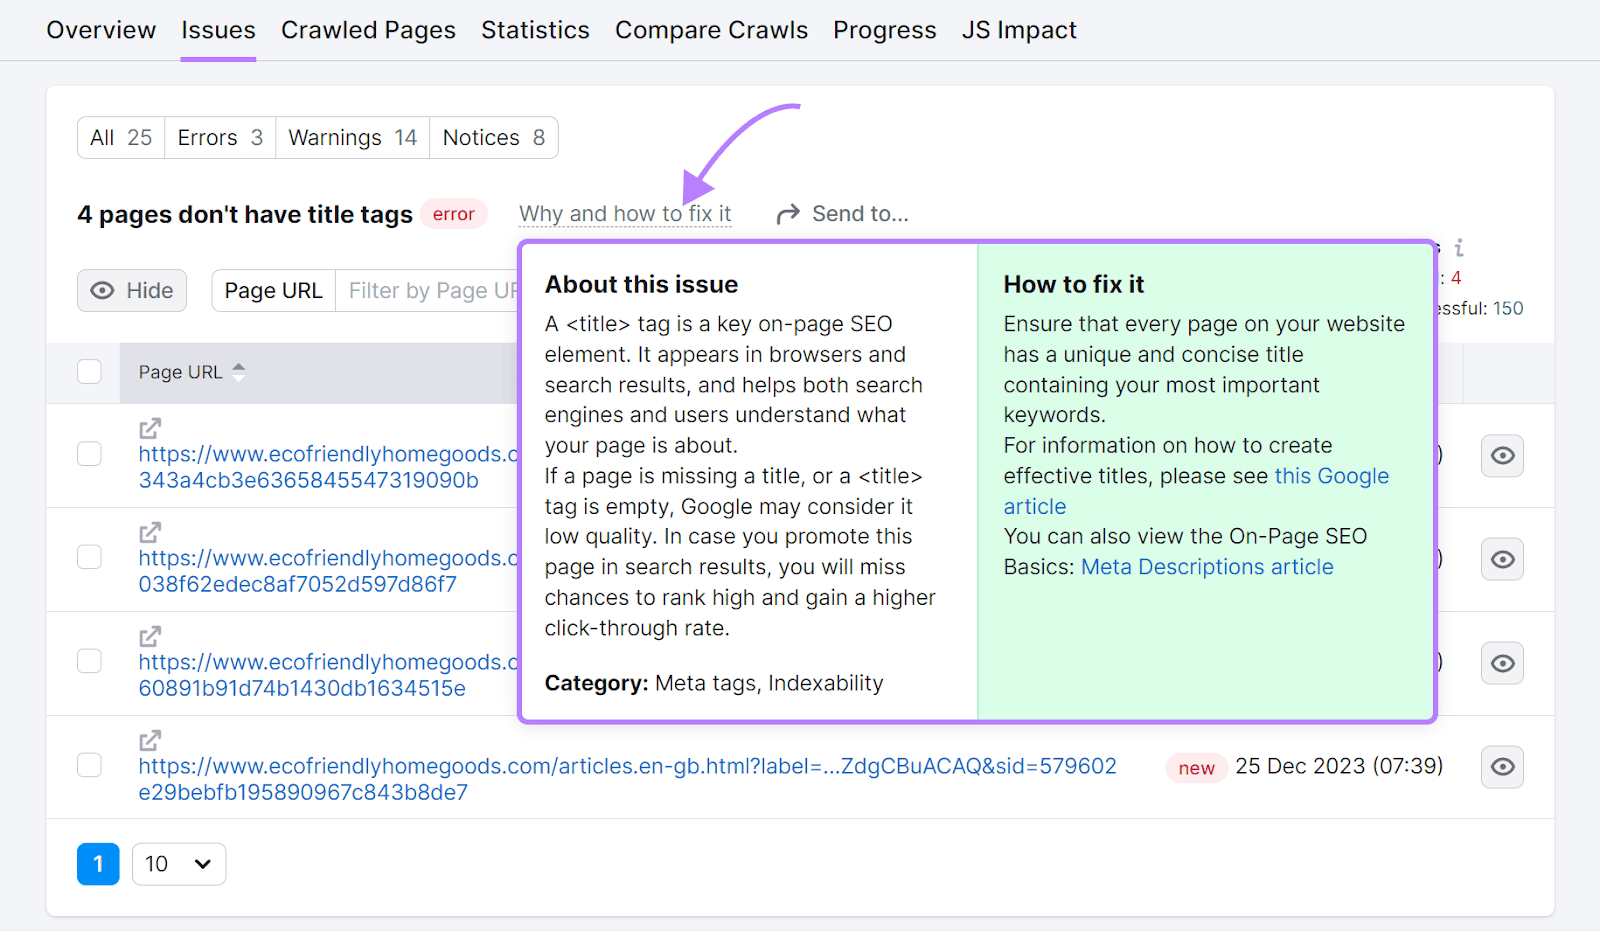 An explanation of the title tag issue and how to fix it in Site Audit